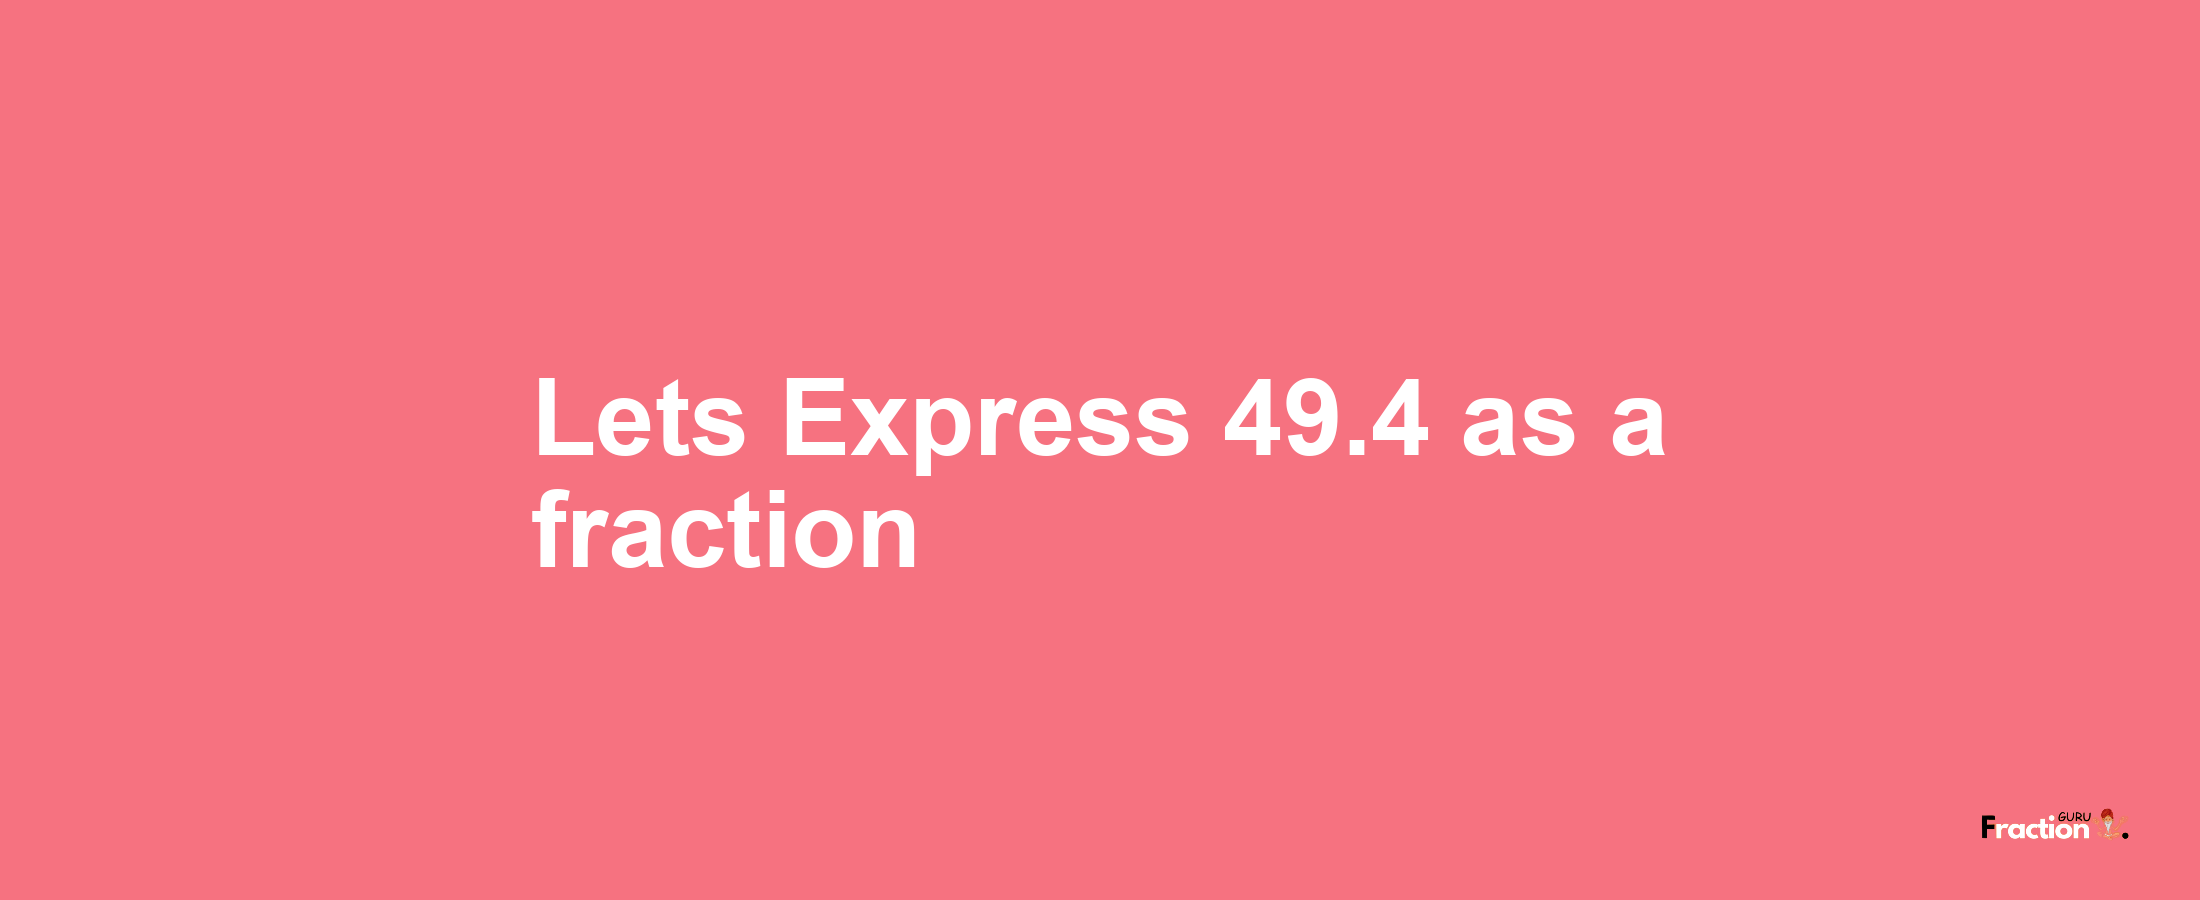 Lets Express 49.4 as afraction